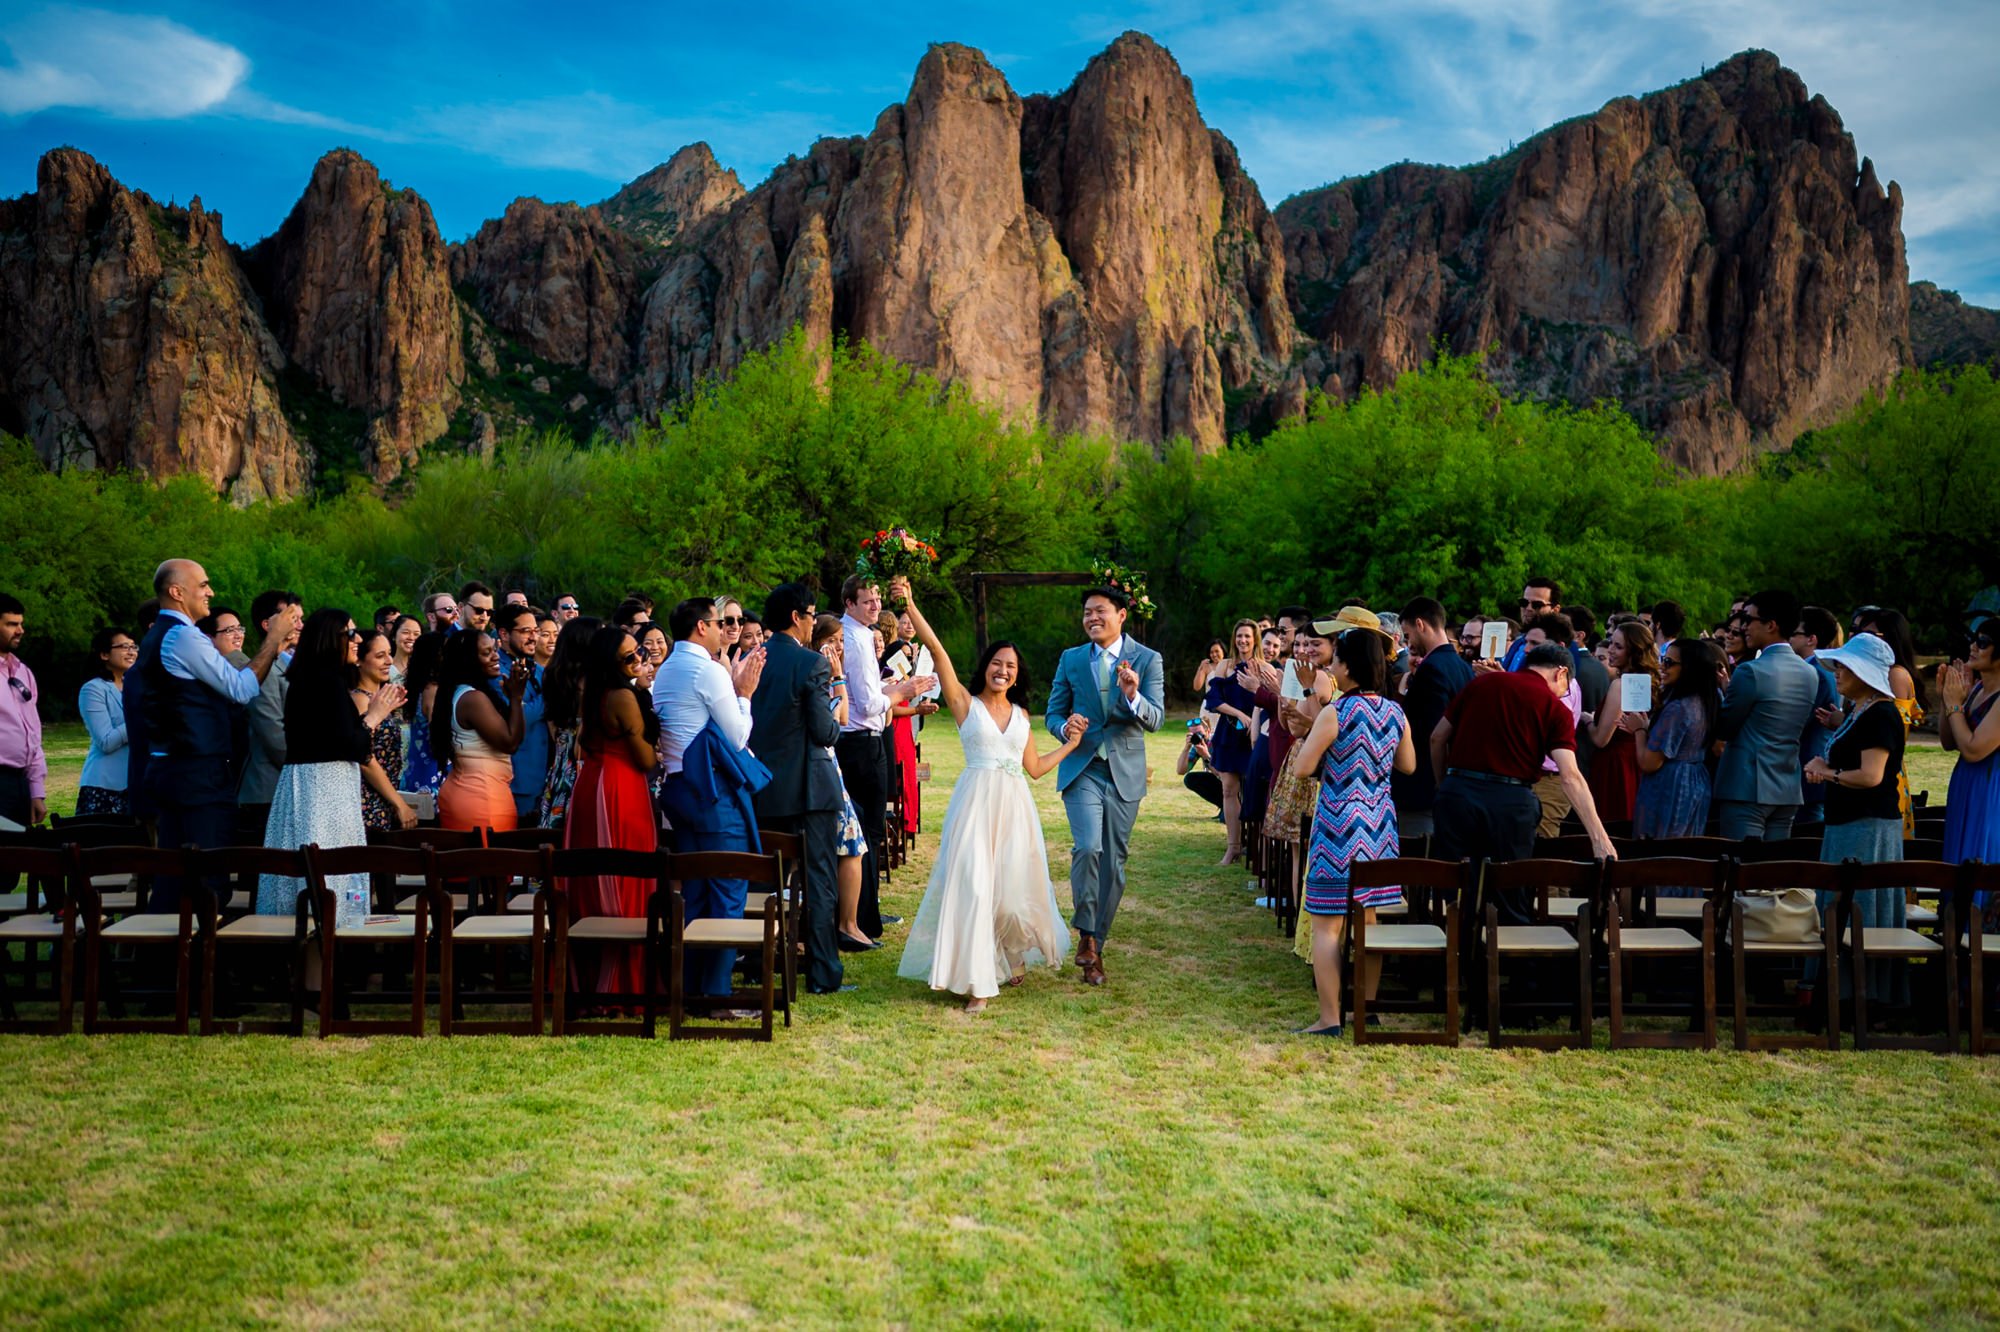 Saguaro Lake Guest Ranch The Perfect Location for a Laid-Back Fun-Filled Wedding. The best documentary wedding photographer Mantas Kubilinskas-99.jpg